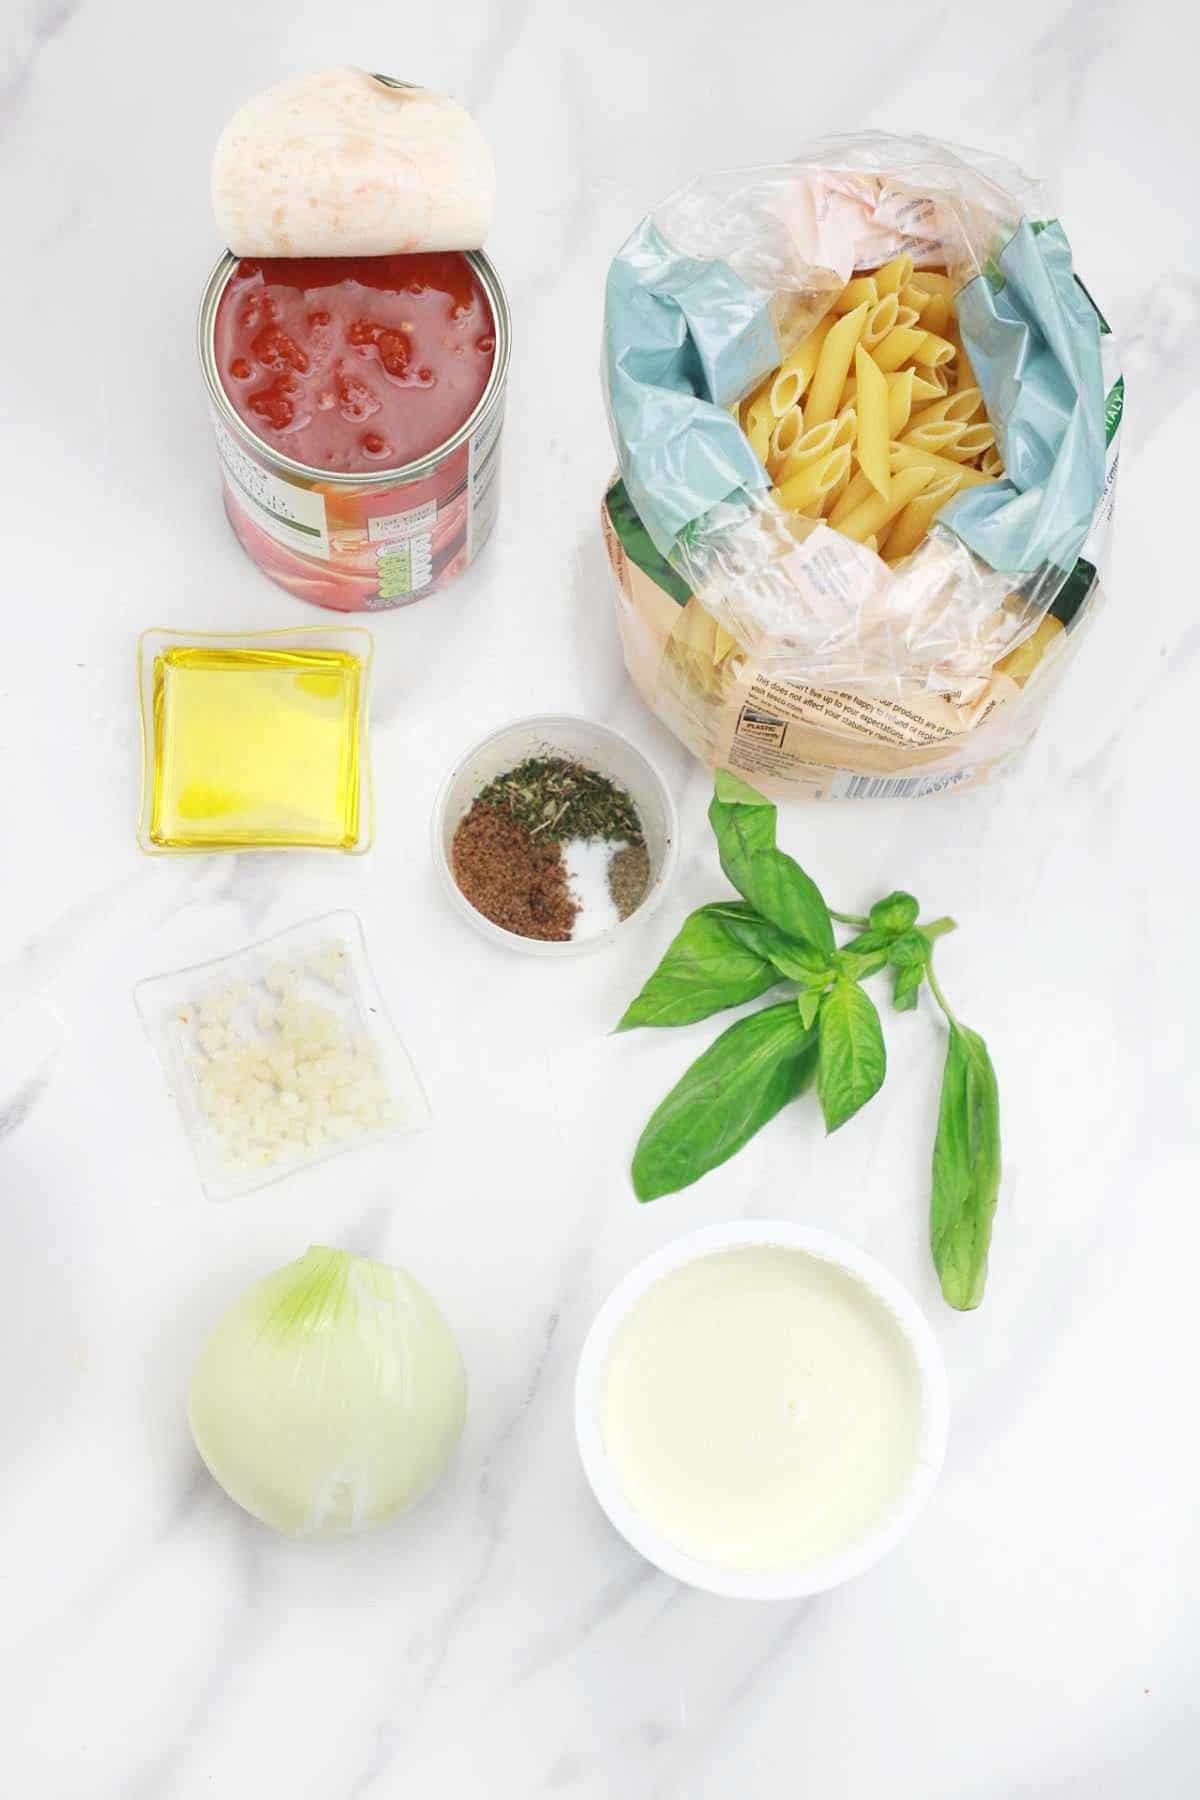 ingredients for the dish displayed.